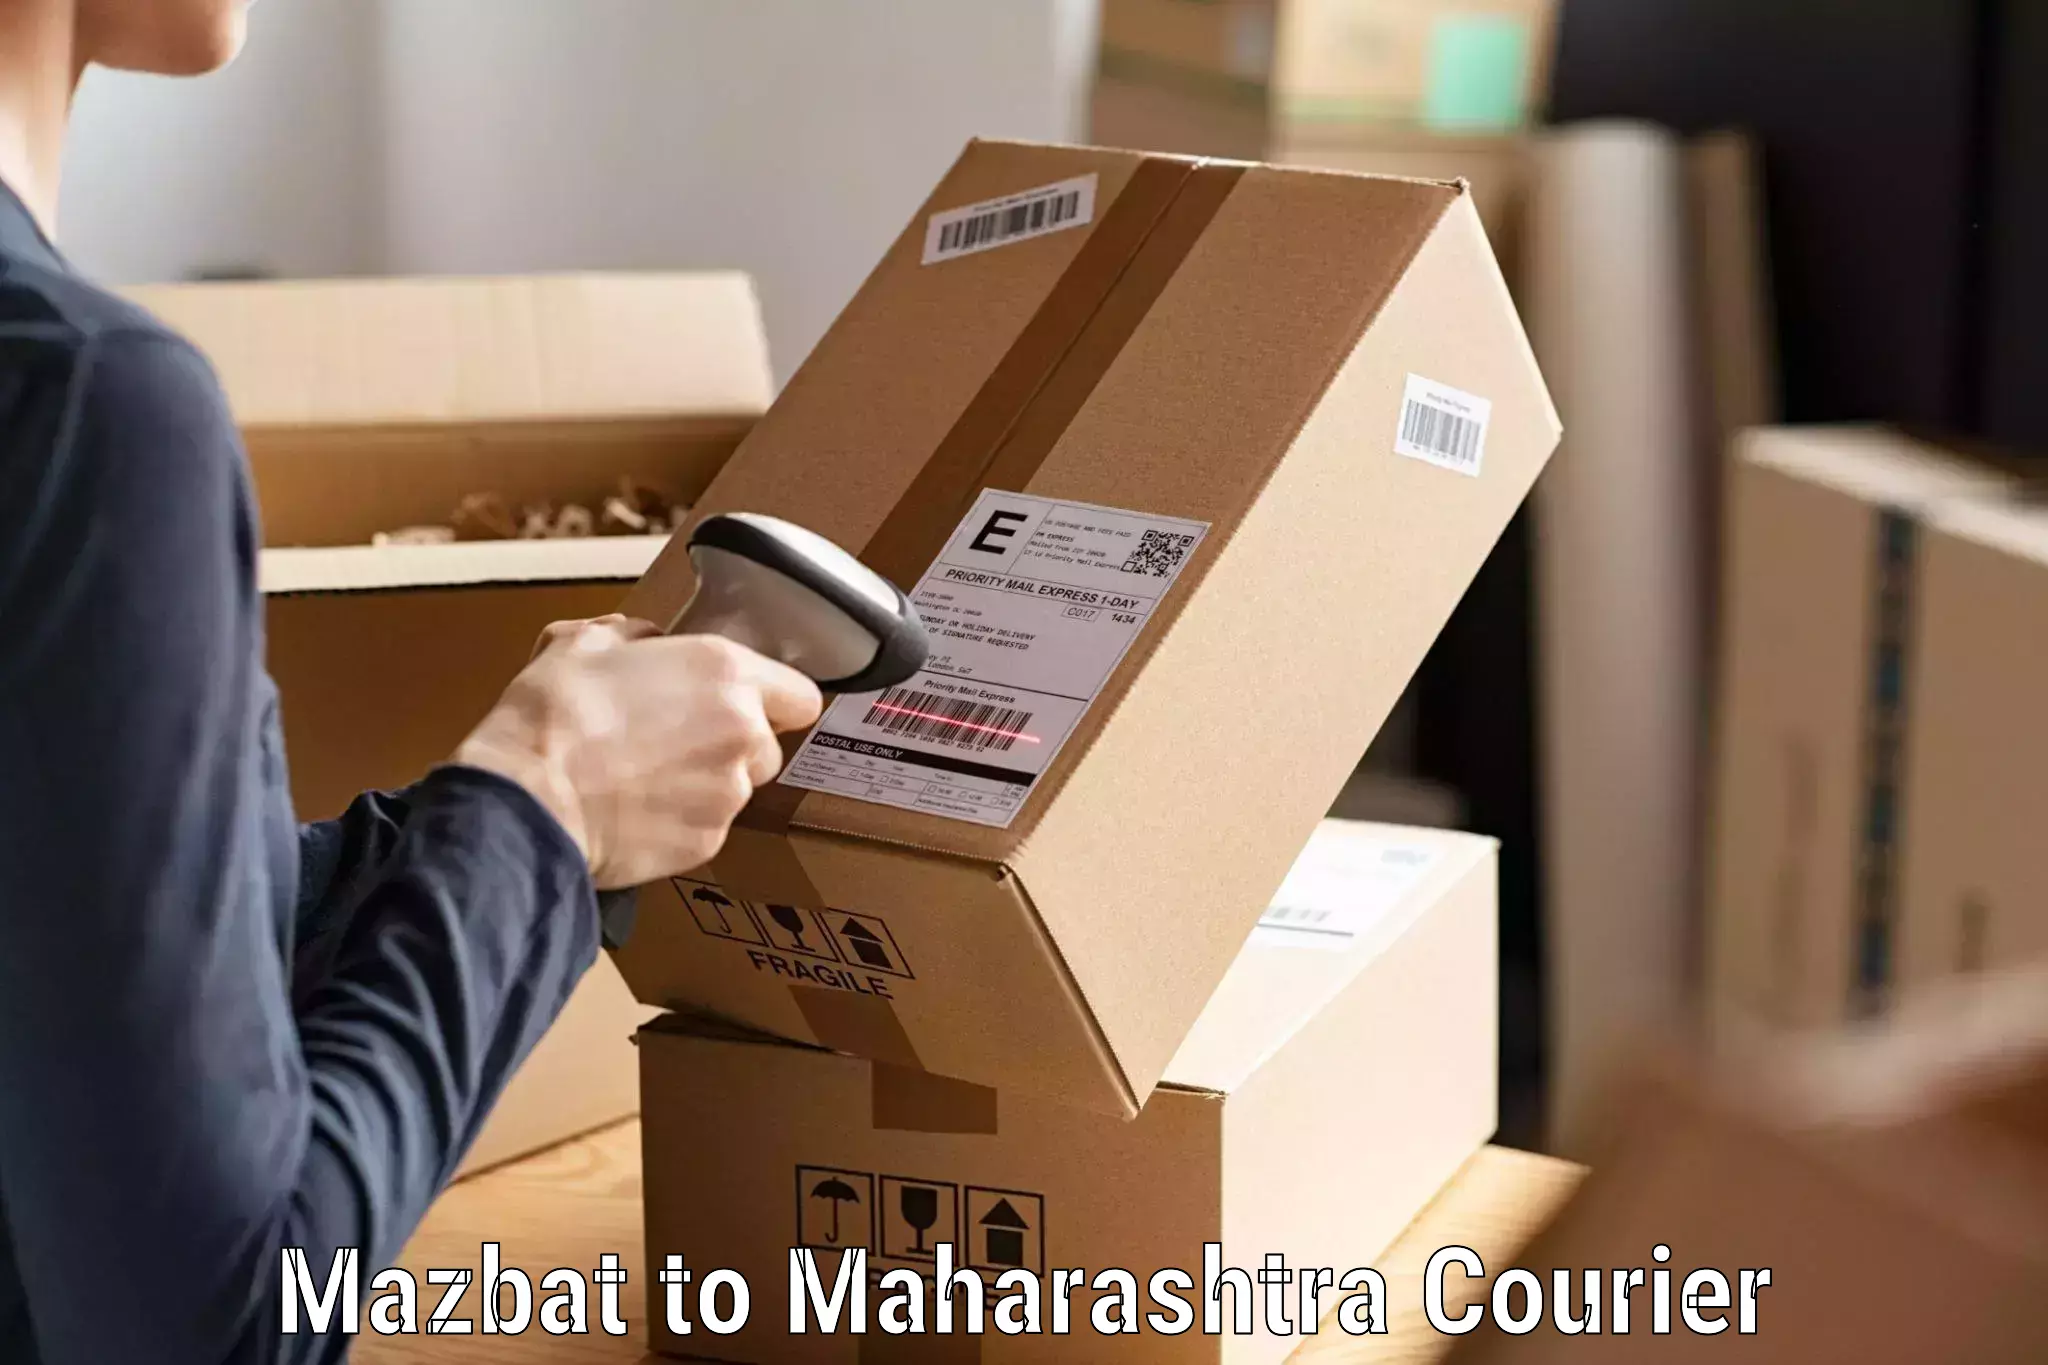 Global courier networks in Mazbat to Pune